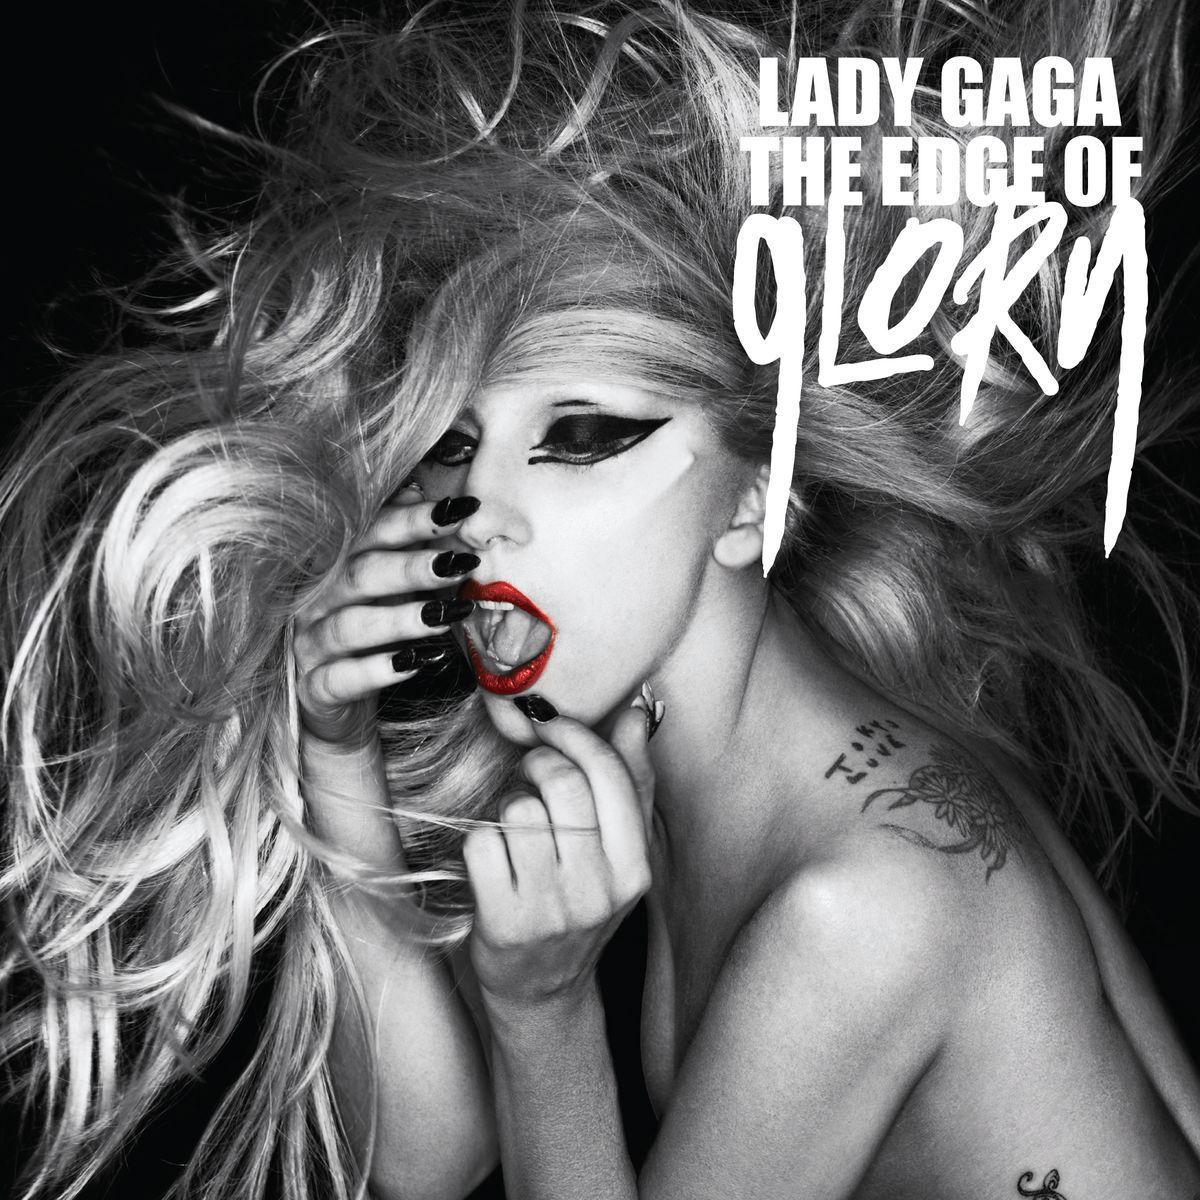 On this day 13 years ago, Lady Gaga released 'The Edge of Glory' as the third Born This Way single.